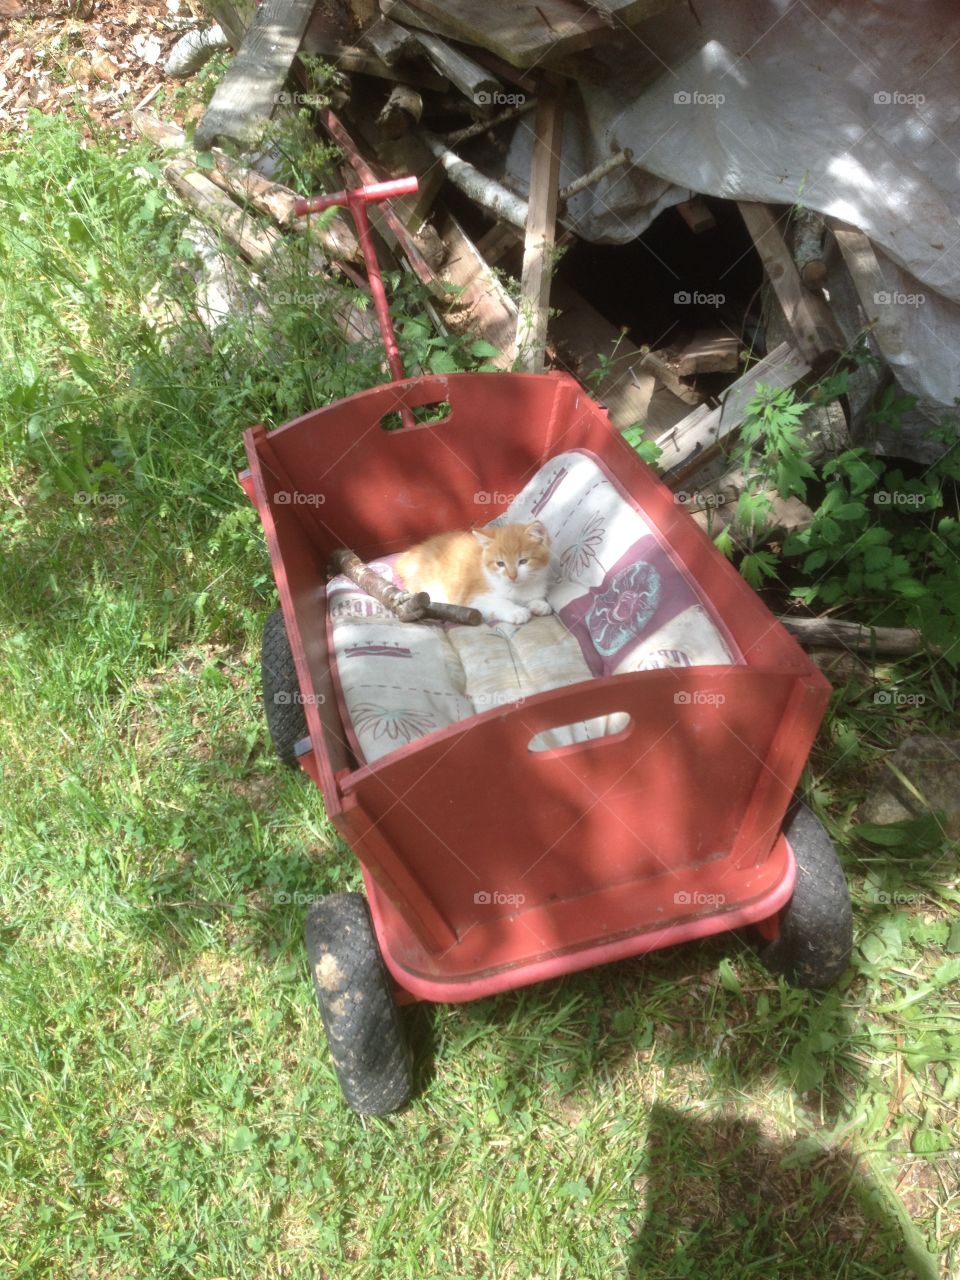 pic of my little orange kitten just chilling in this homemade carriage on wheels.